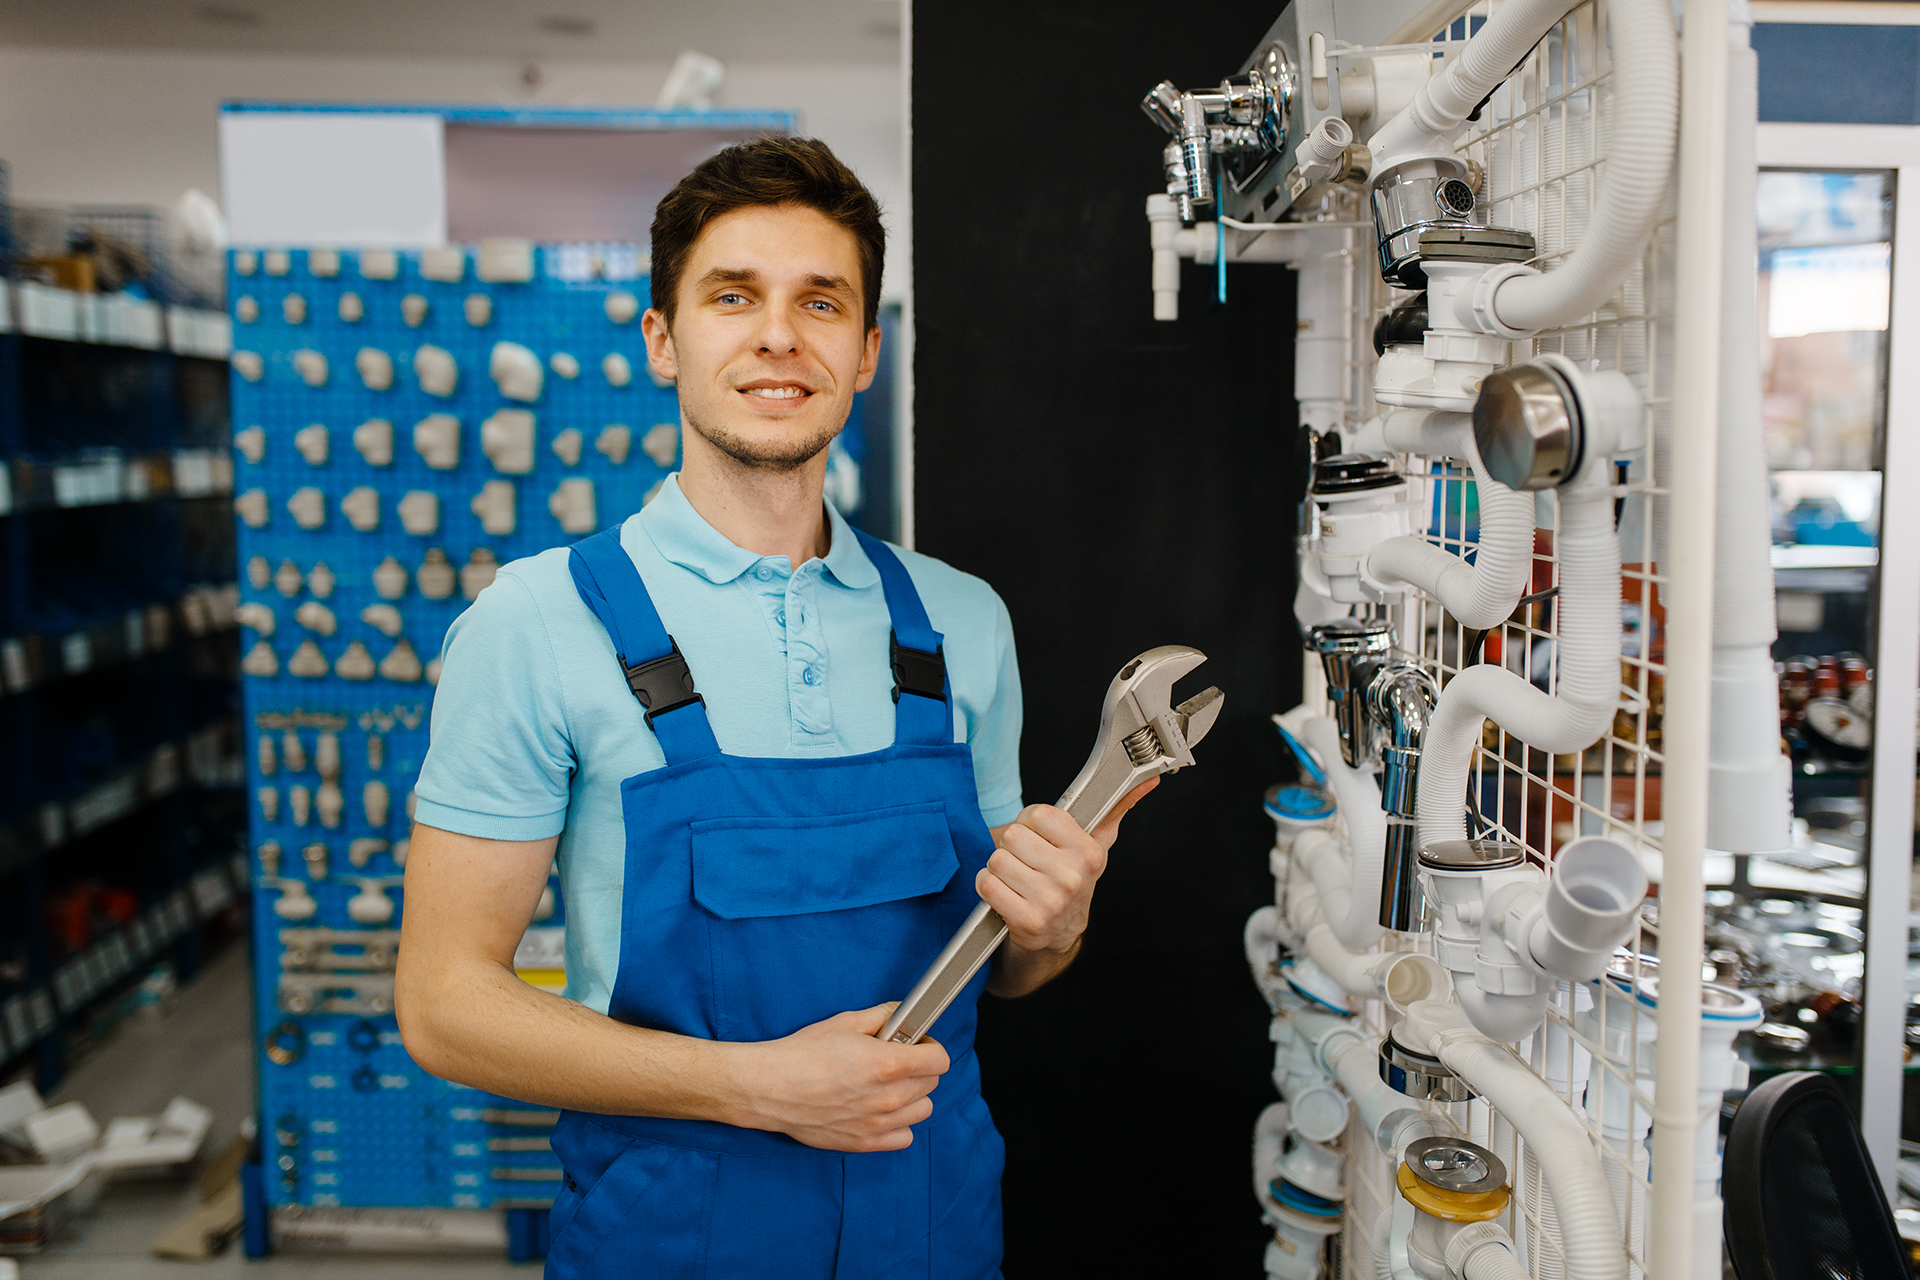 Plumber with pipe wrenches poses at the showcase, plumbering store choice. Man buying sanitary engineering tools and equipment in shop